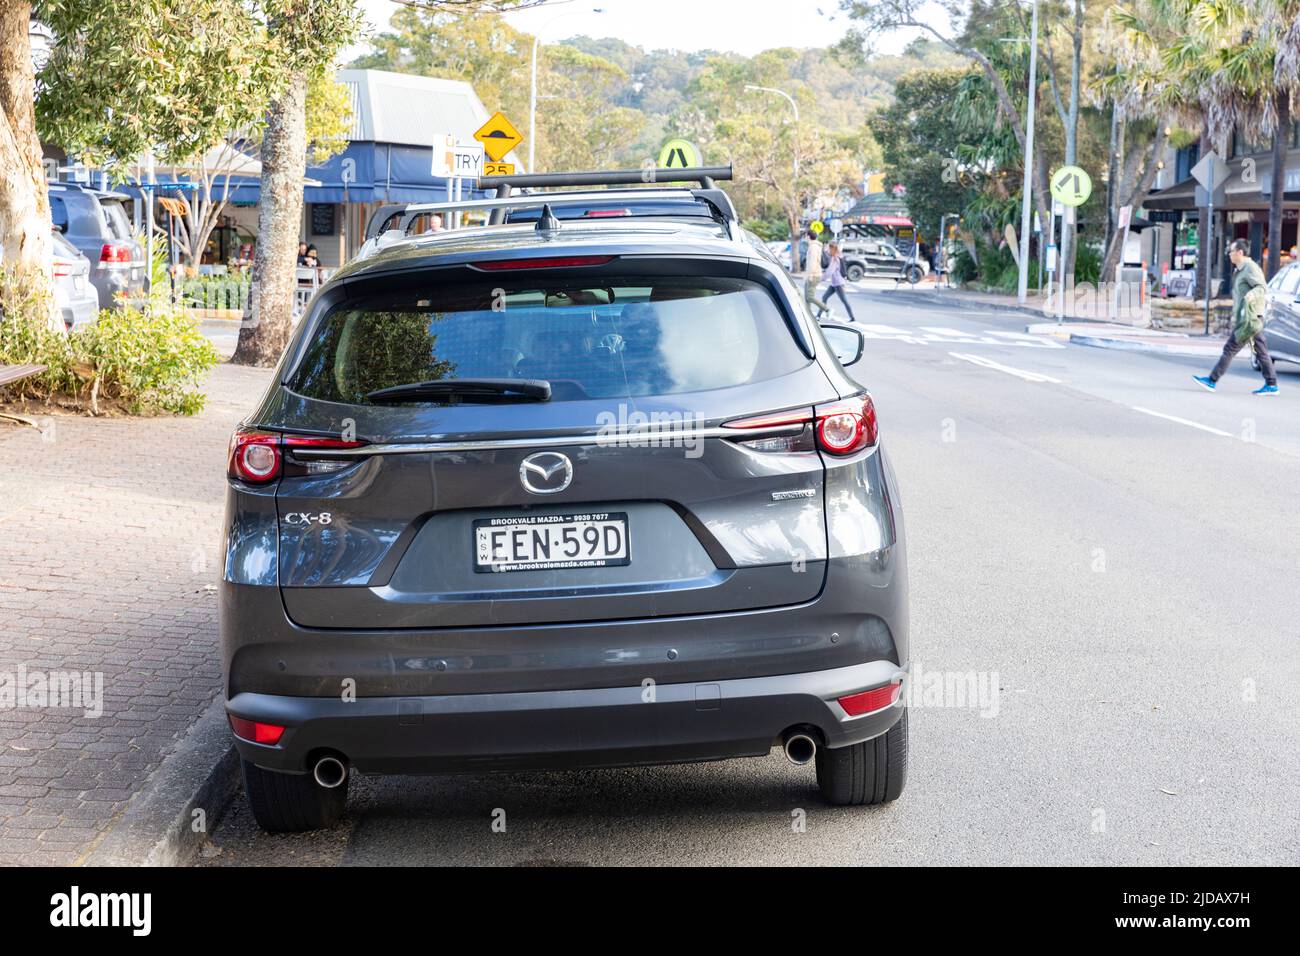 Mazda CX8, 2020 model, parked in Avalon Beach Sydney,NSW,Australia a small to mid sized SUV type vehicle Stock Photo